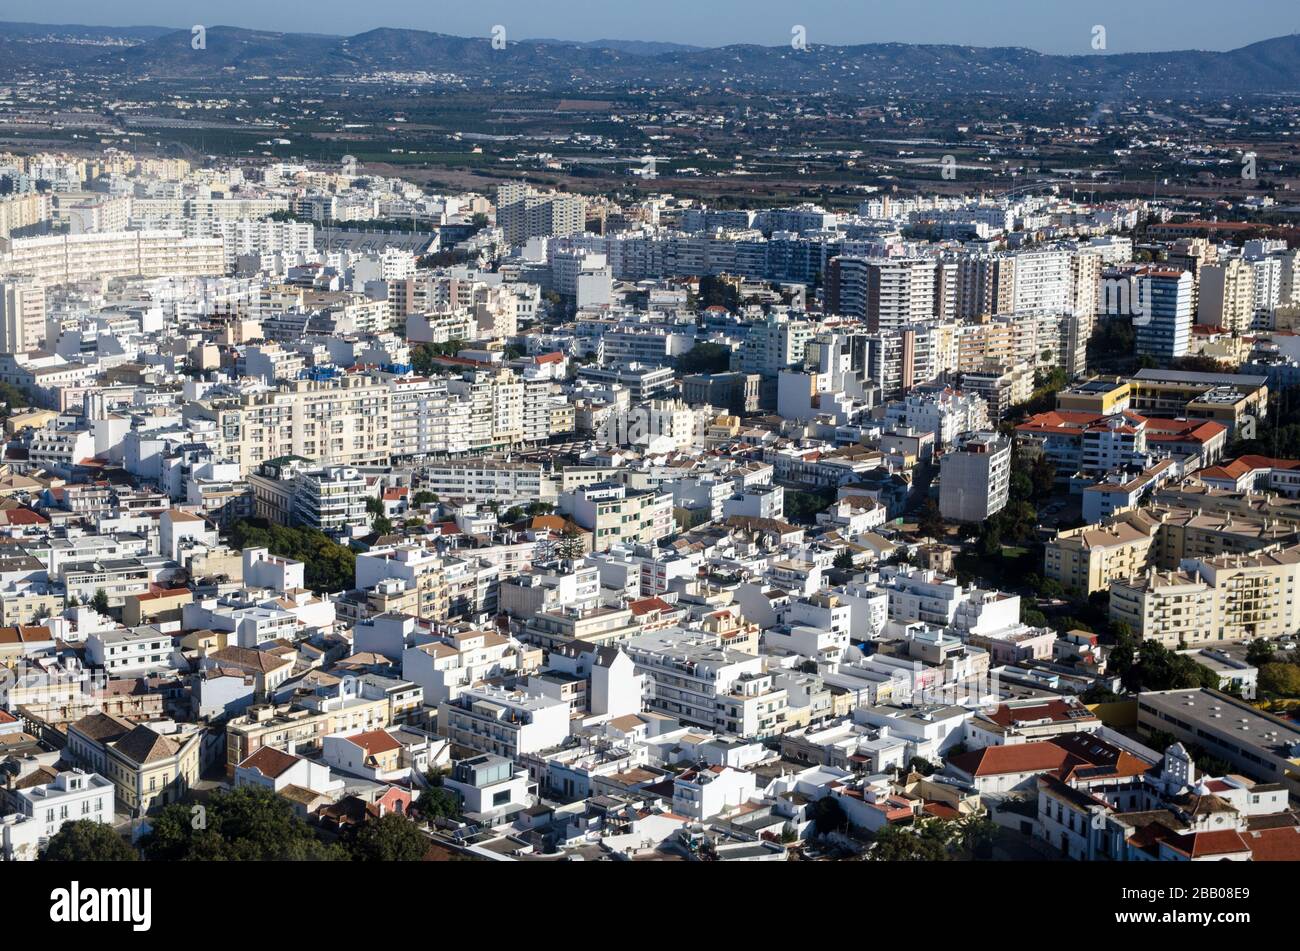 Aerial view of the city of Faro on the Algarve coast of Portugal.  Part of Sporting Club Farense can be seen towards the top. Stock Photo